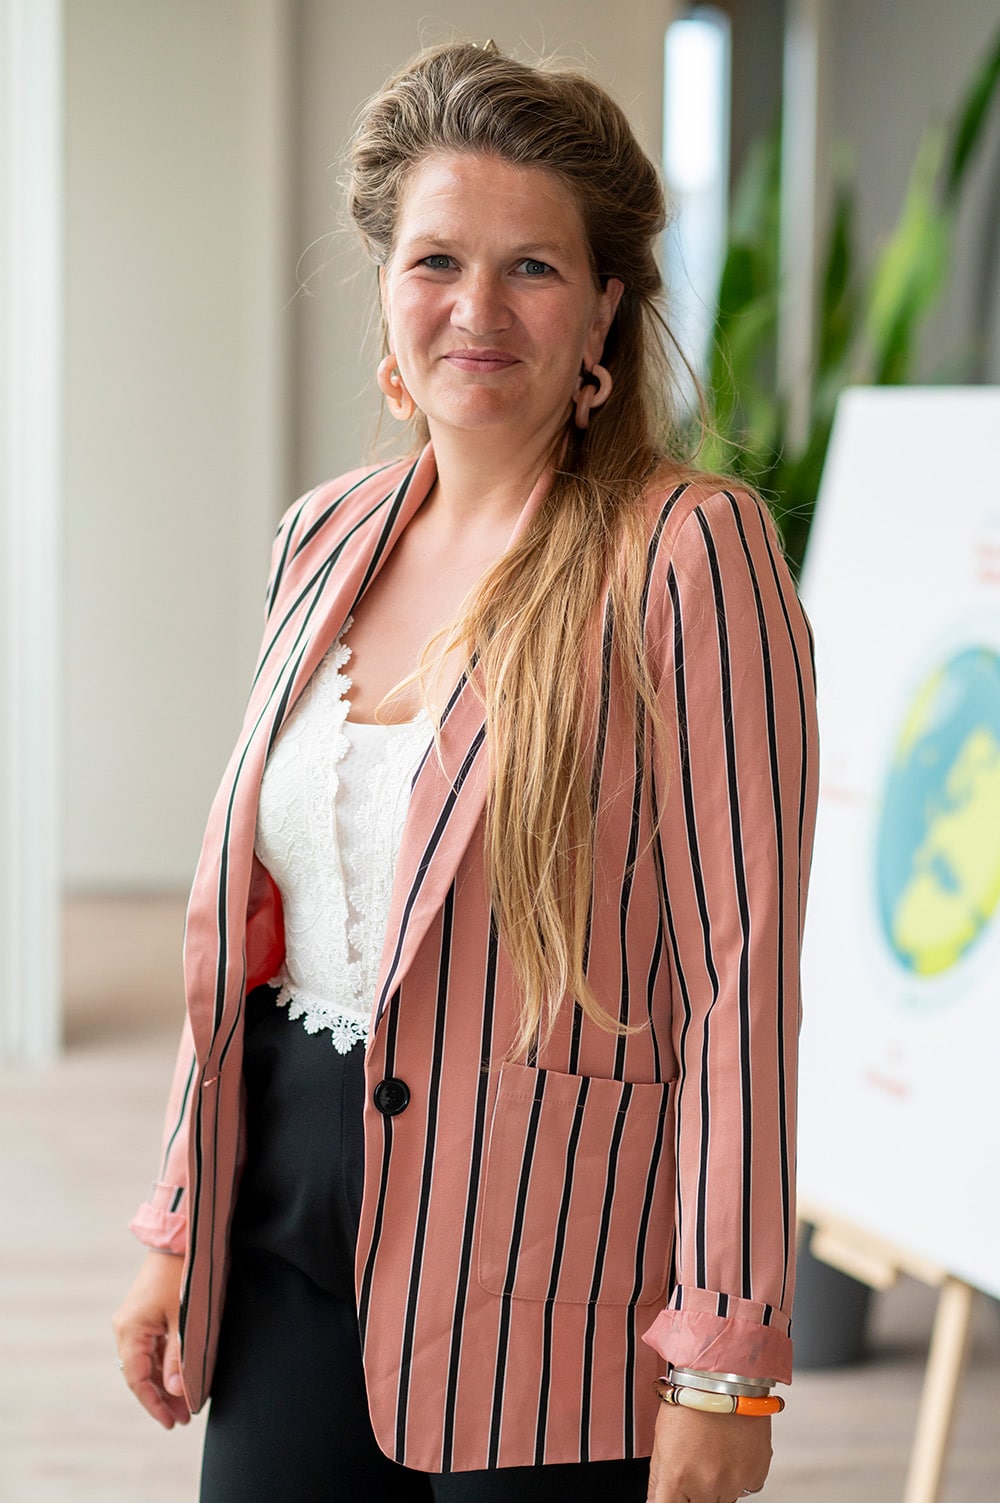 Eveline Aalbers - International account manager